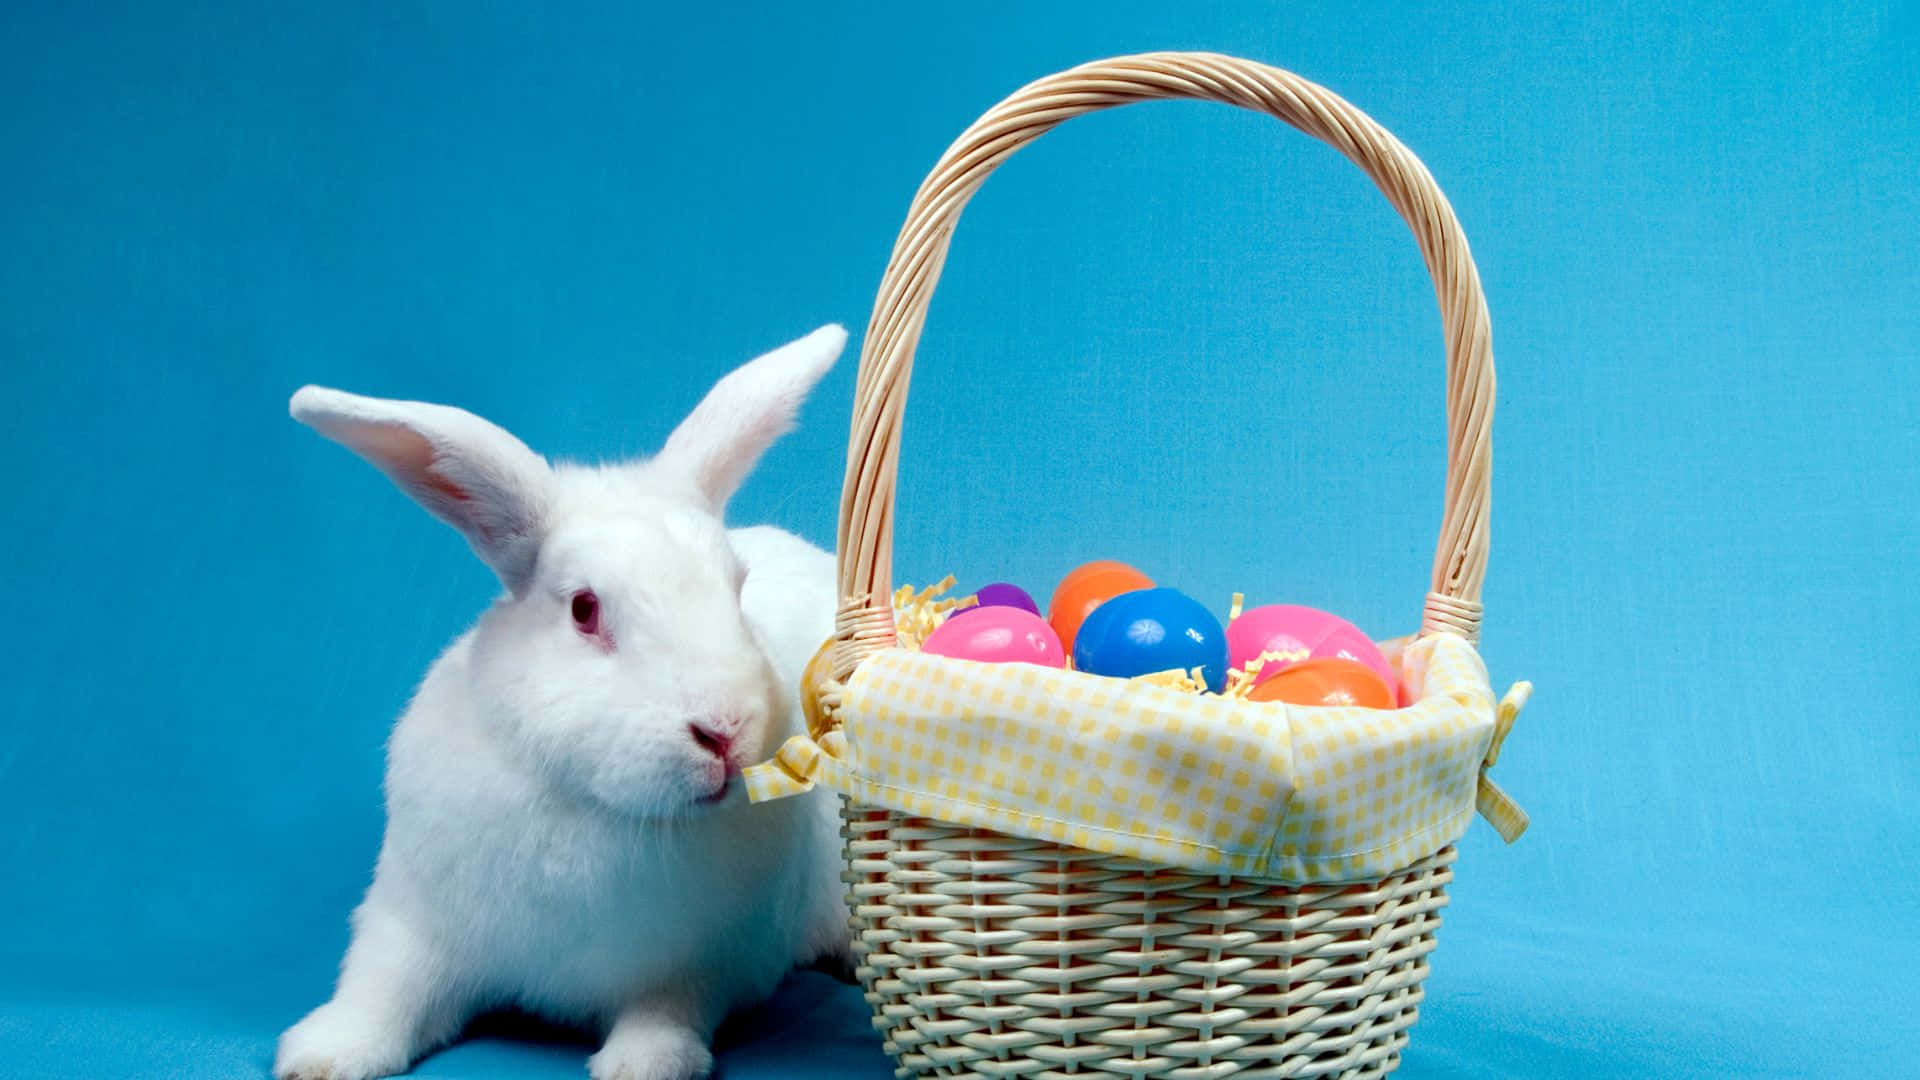 Download Celebrate Easter with a Colorful Basket Wallpaper | Wallpapers.com